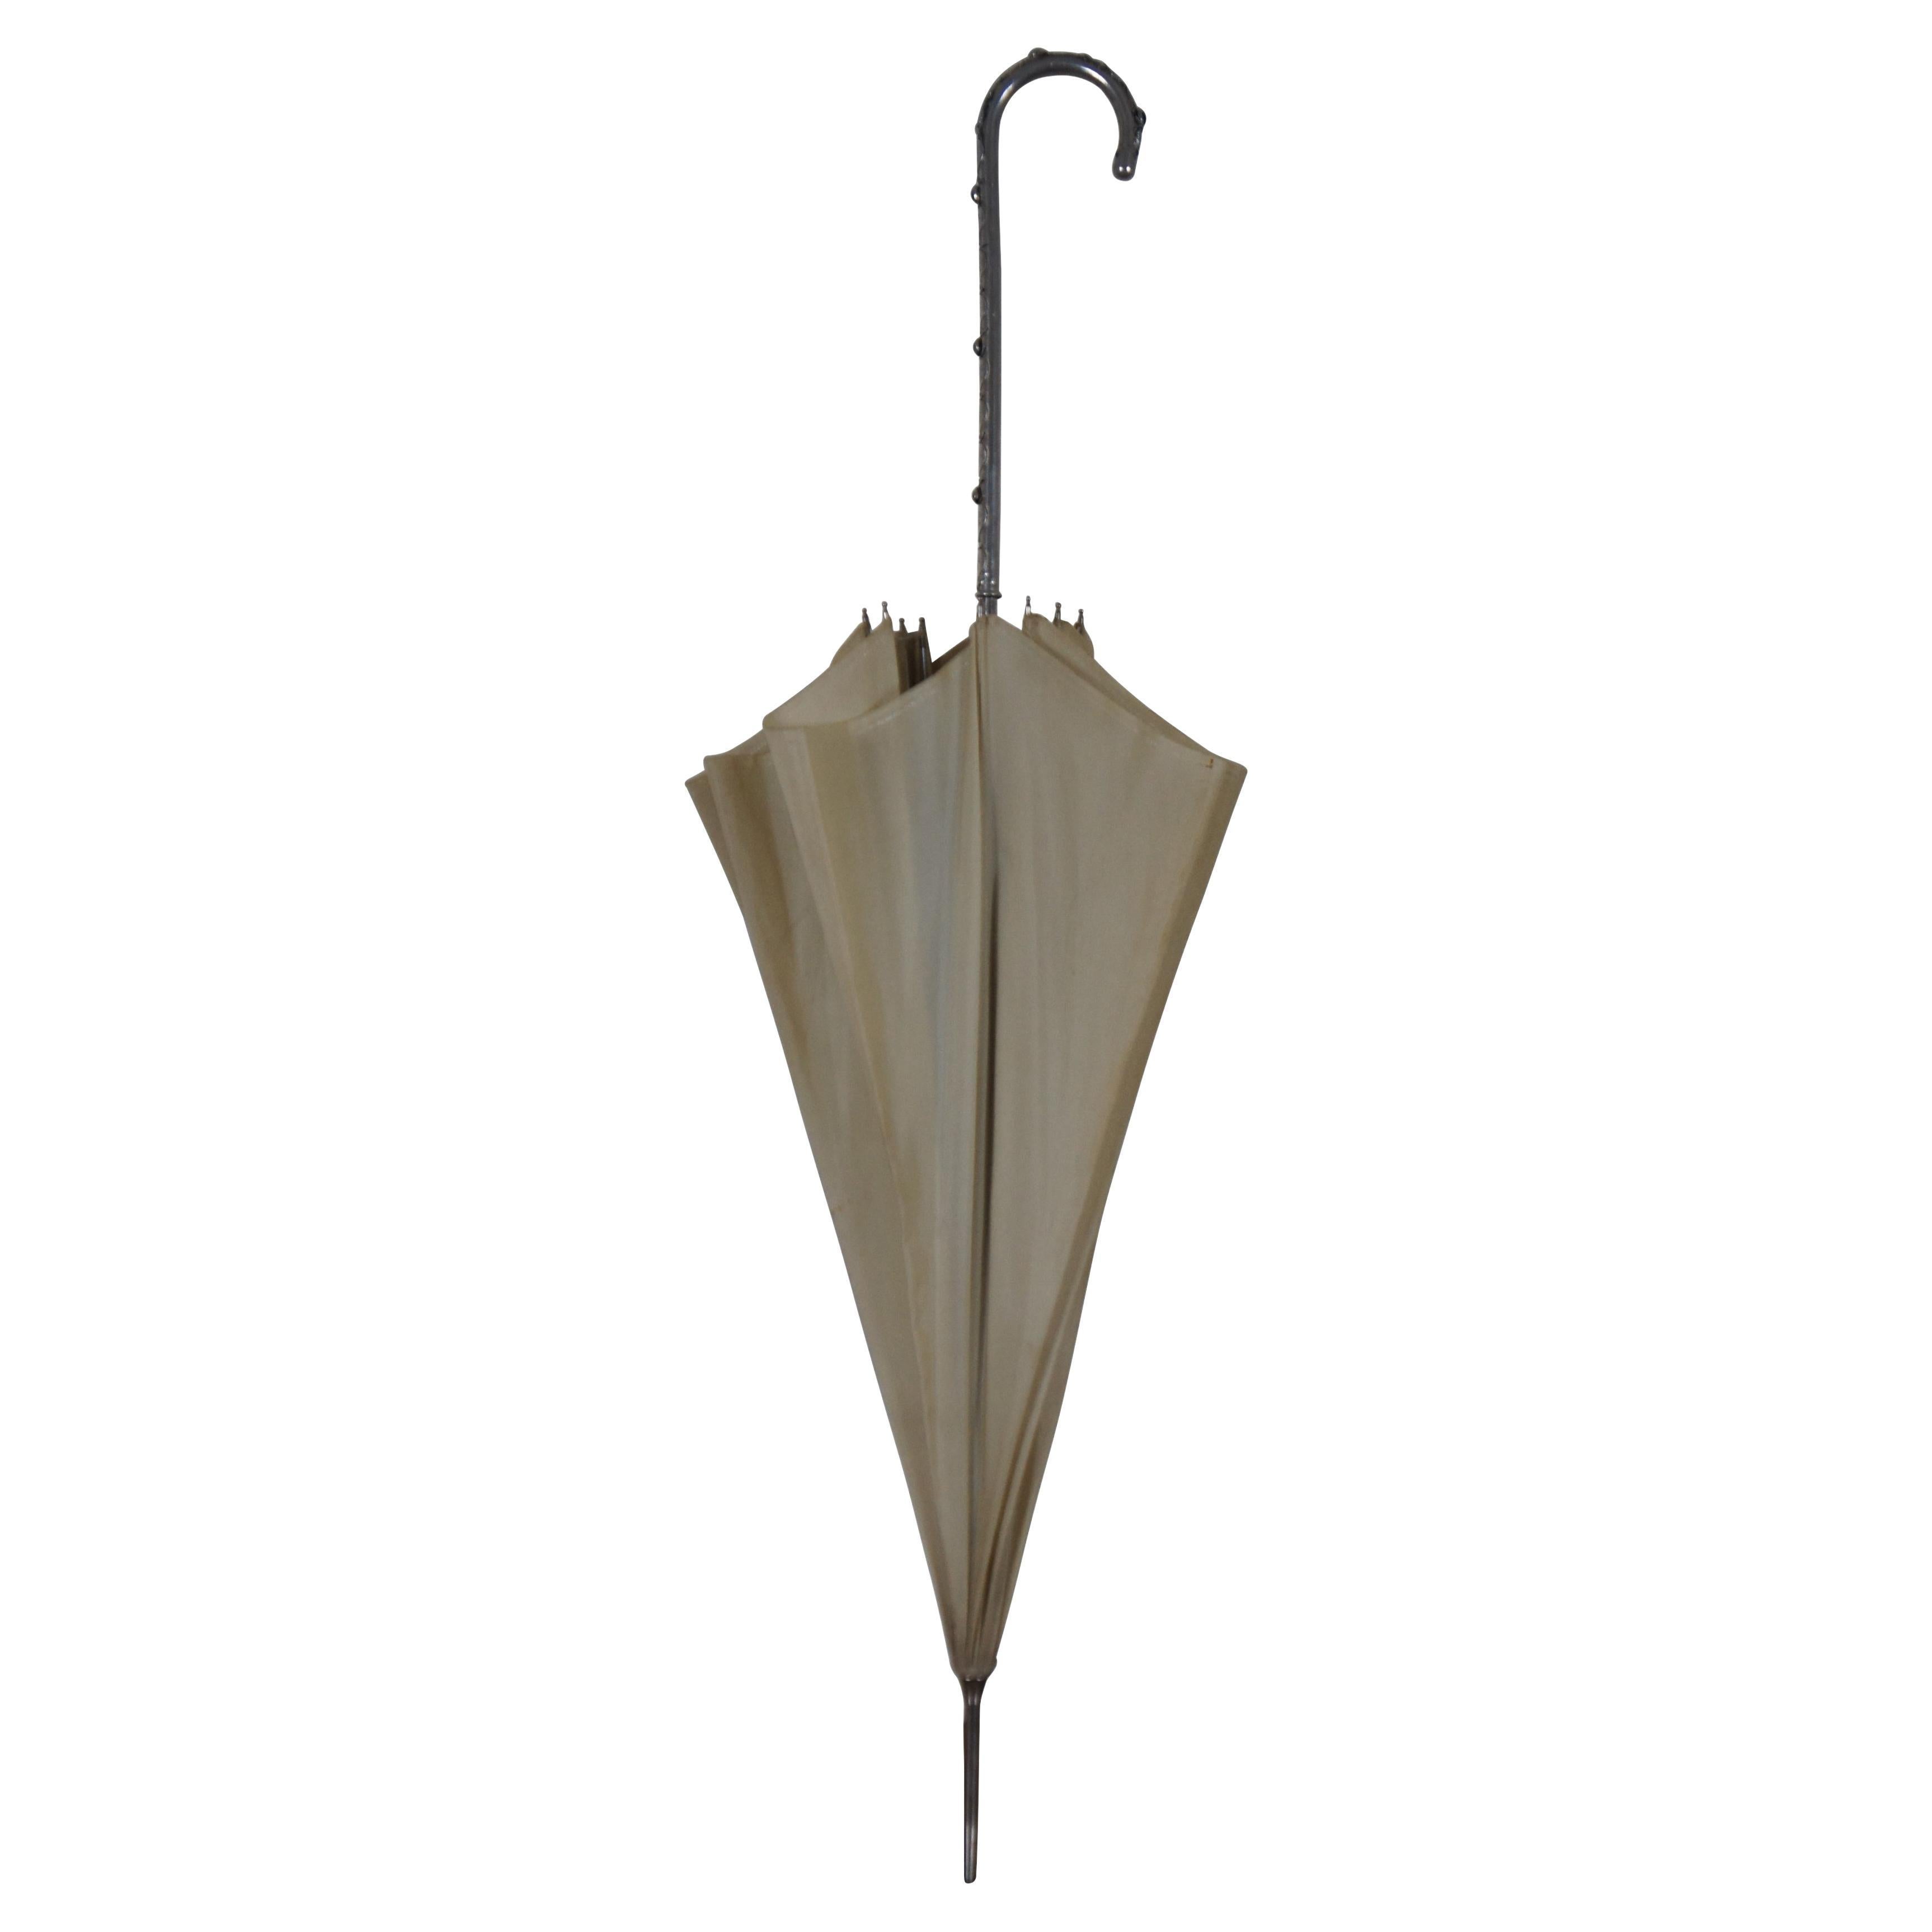 Late Victorian beige umbrella or parasol with silver handle decorated with a molded pattern of leaves and green glass jewels; labeled Fraclem -Florence, Made in Italy.

1.75” x 33.25” / Open Diameter – 34.5” (Diameter x Height)